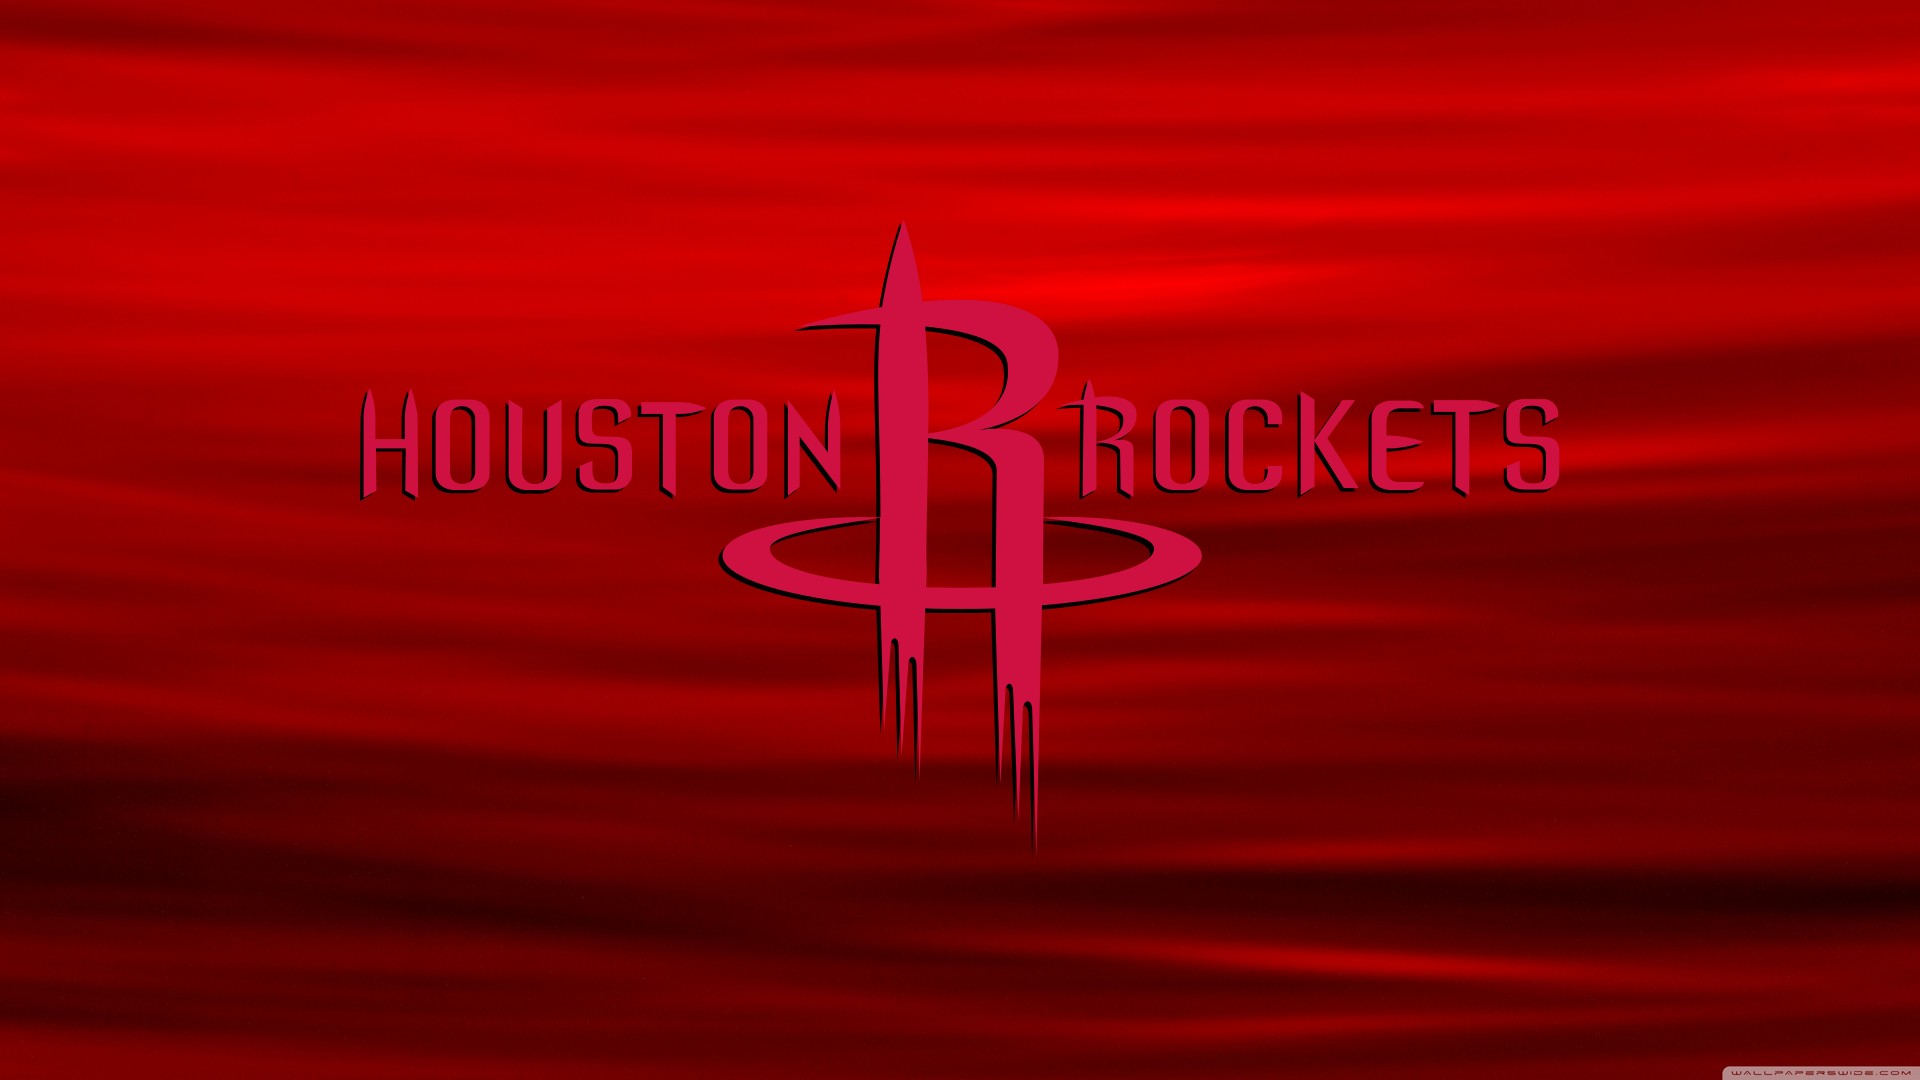 HD Rockets Wallpapers with image dimensions 1920x1080 pixel. You can make this wallpaper for your Desktop Computer Backgrounds, Windows or Mac Screensavers, iPhone Lock screen, Tablet or Android and another Mobile Phone device